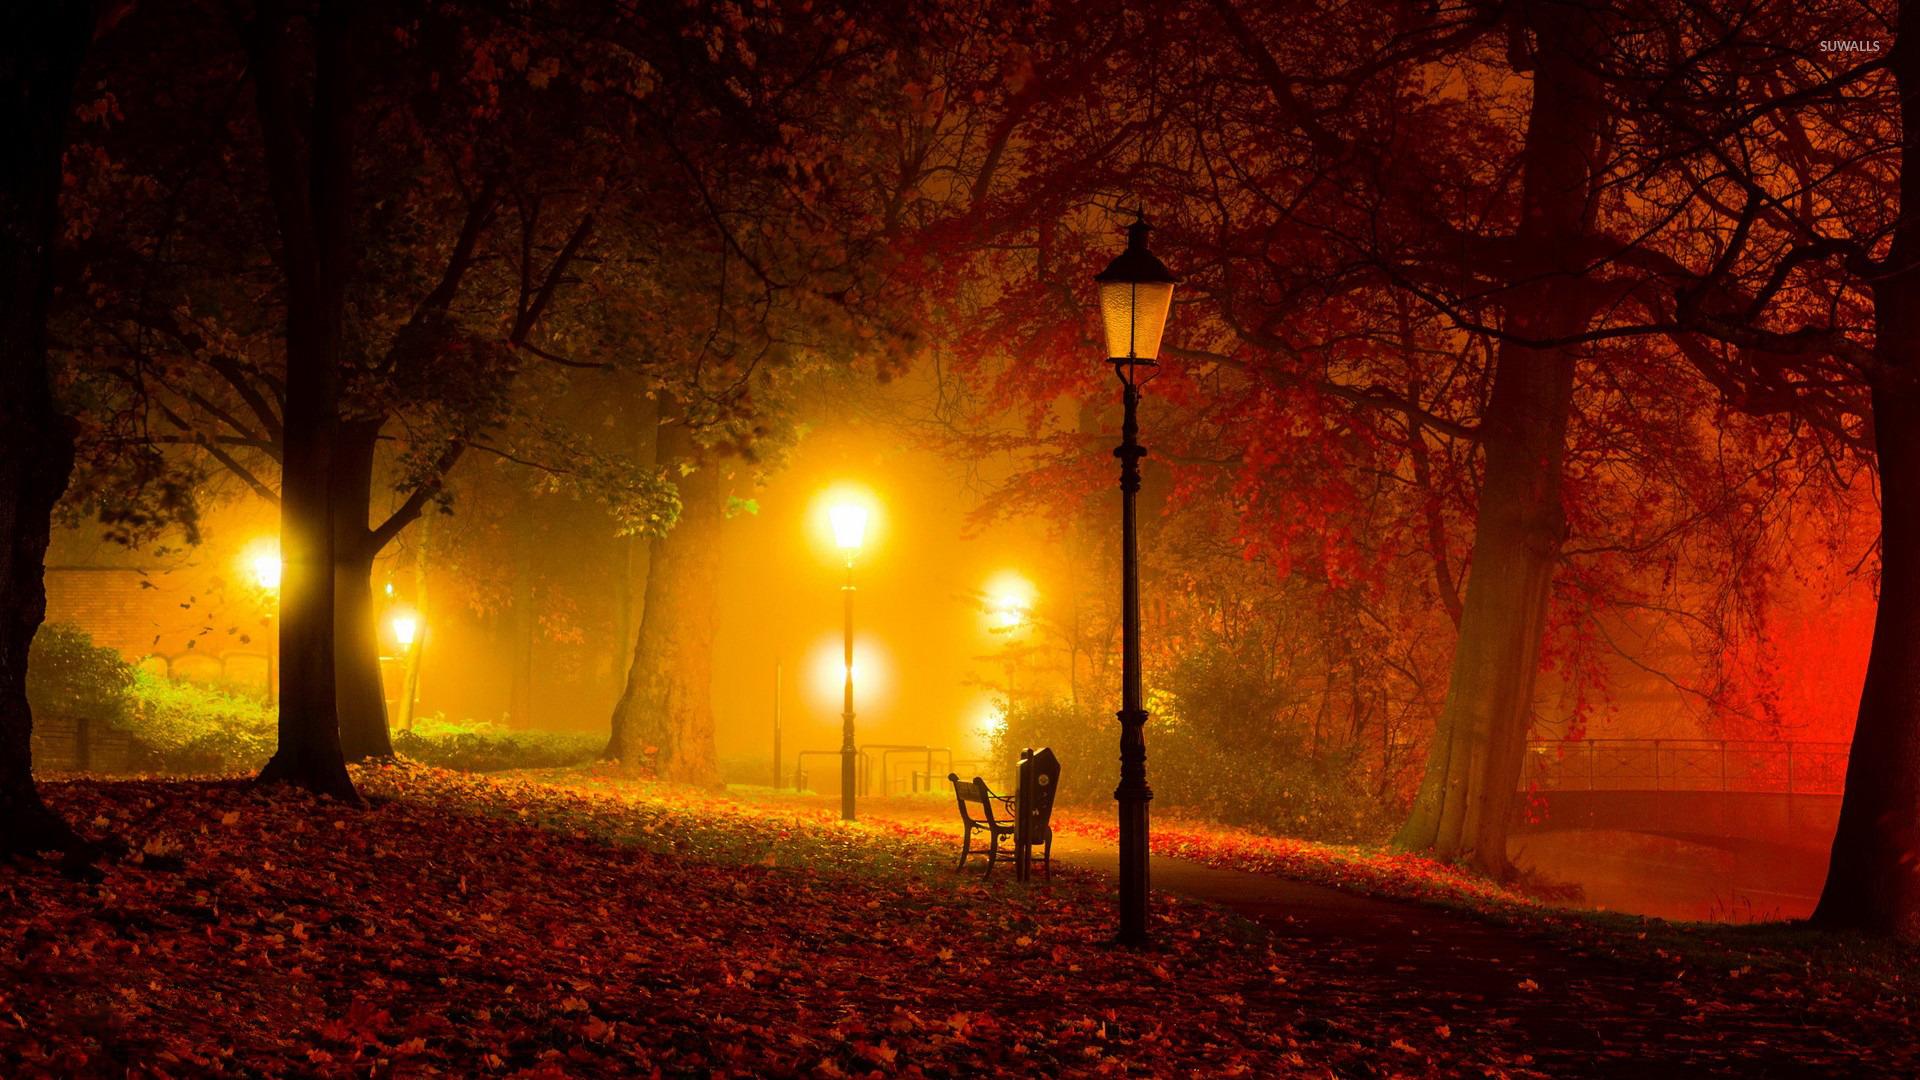 Amazing colors in the autumn park wallpaper